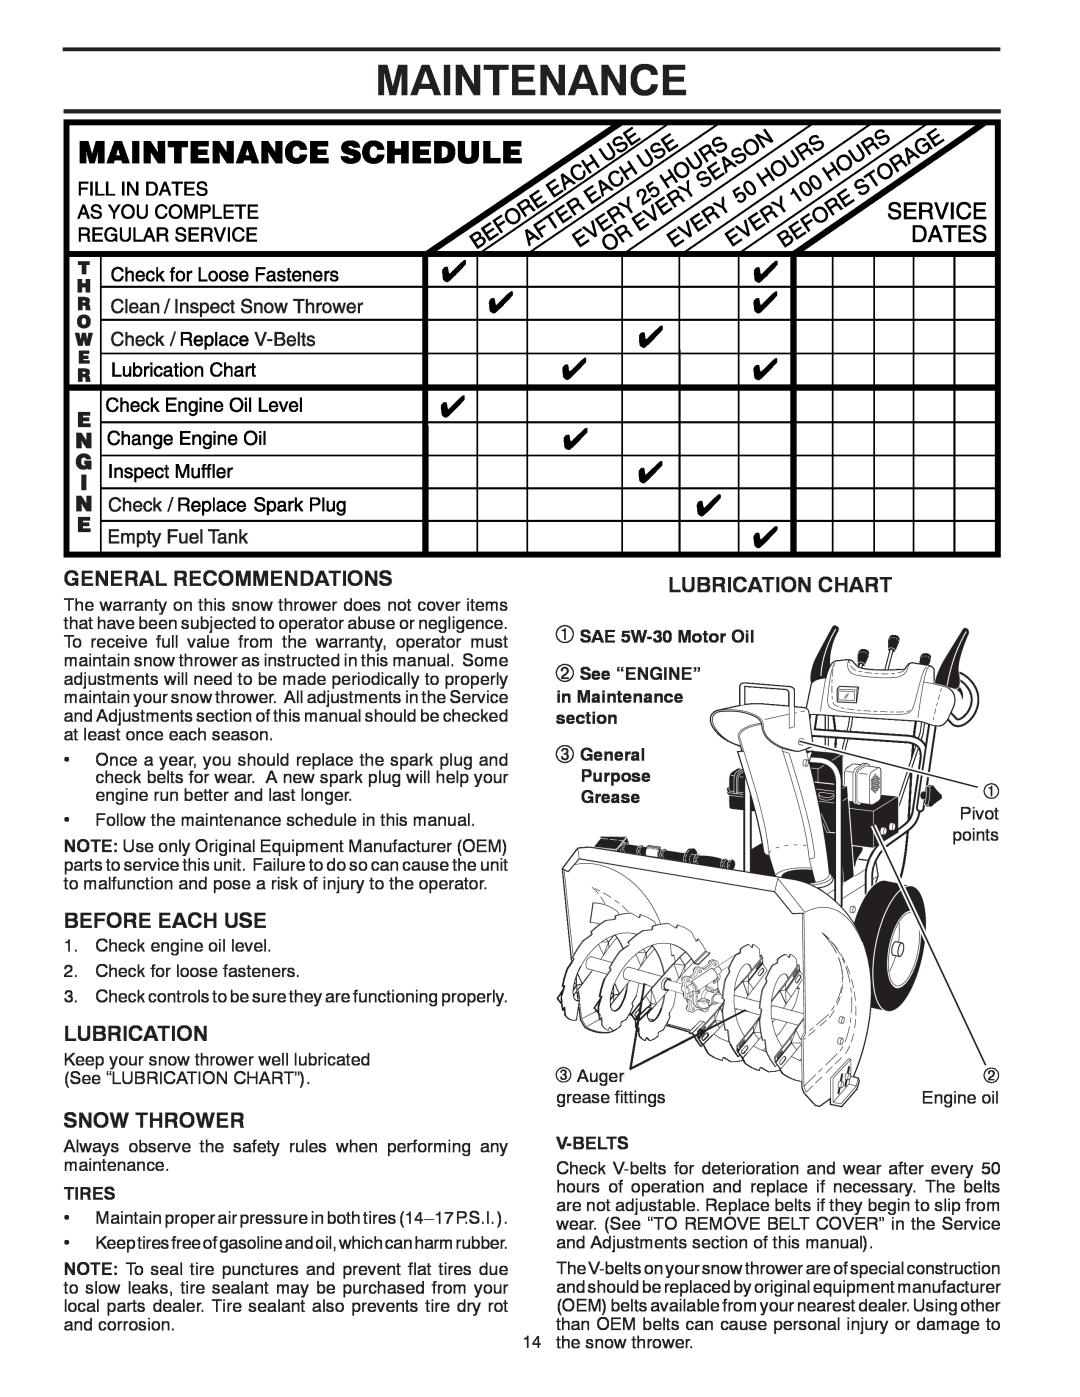 Poulan XT11530ES, 428861 Maintenance, General Recommendations, Before Each Use, Snow Thrower, Lubrication Chart, Tires 